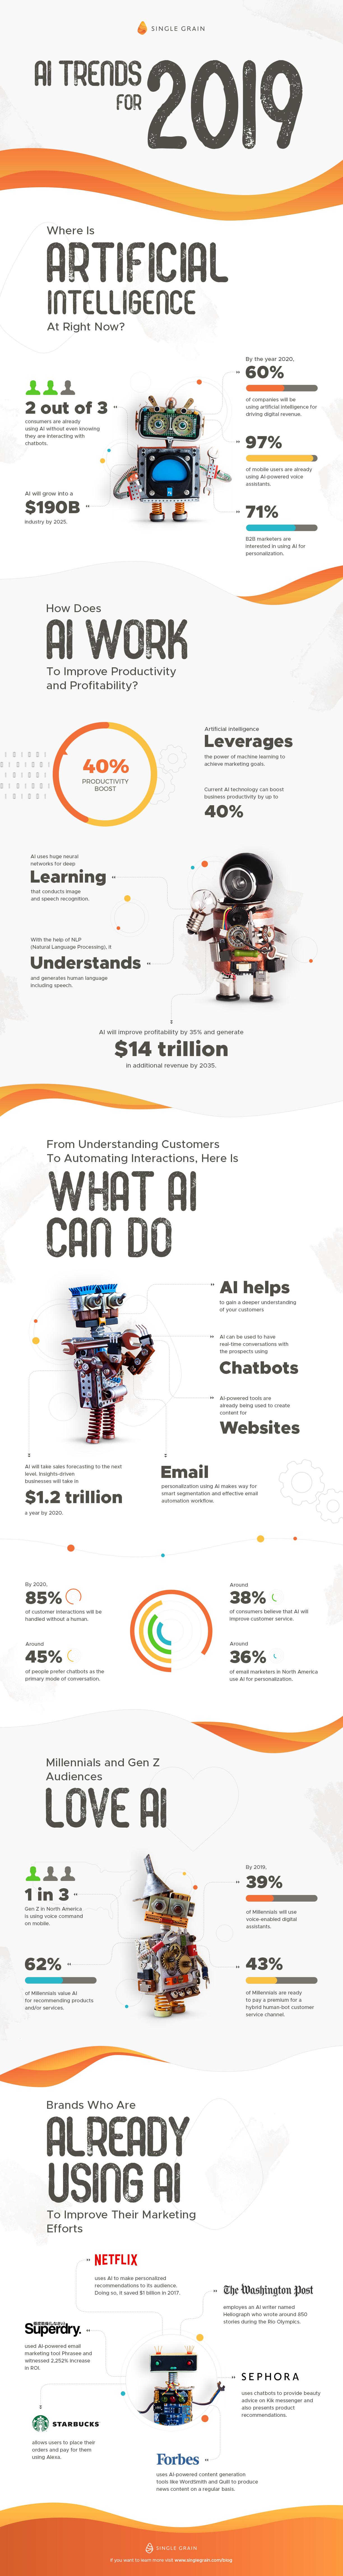 AI Trends in Marketing [Infographic]